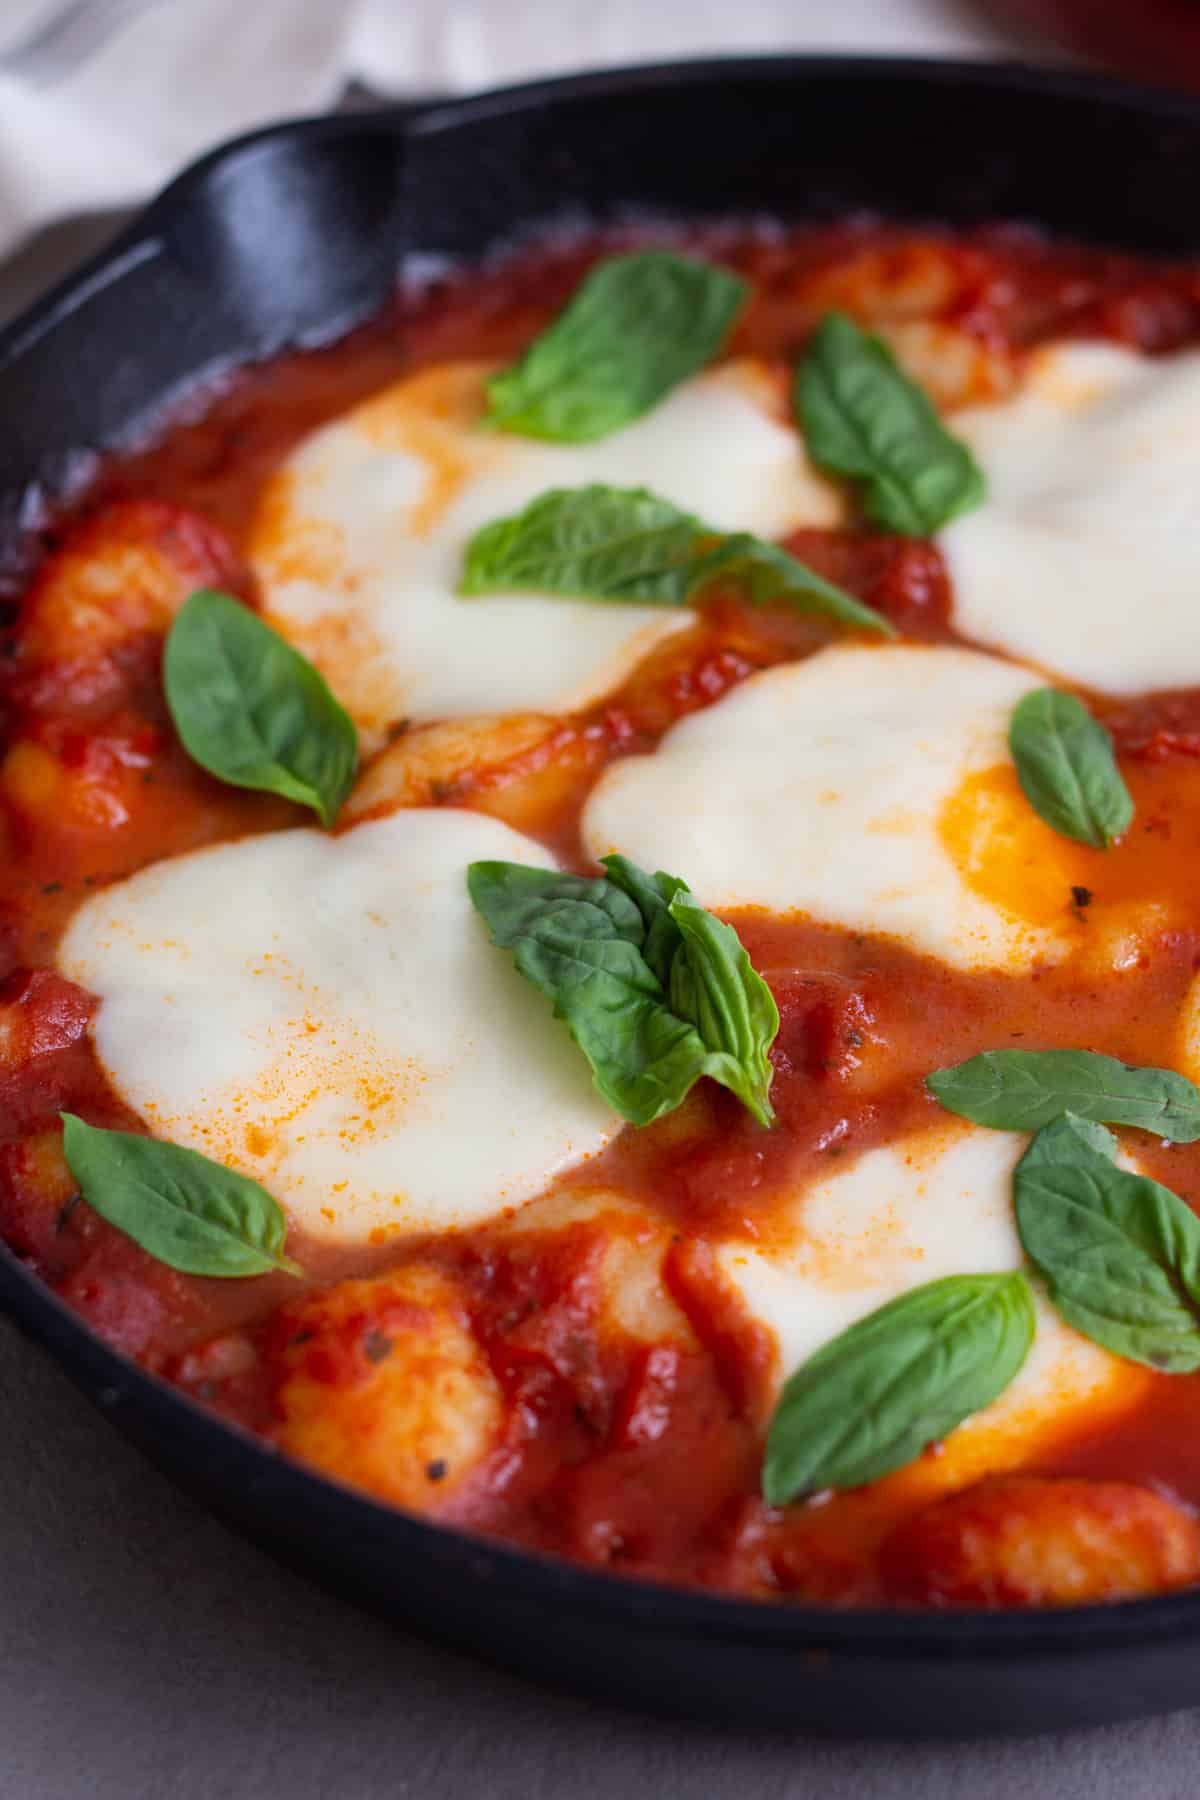 Have a fancy homemade meal in twenty minutes! Make this Easy Caprese Gnocchi so your entire family can enjoy a delicious meal together.
